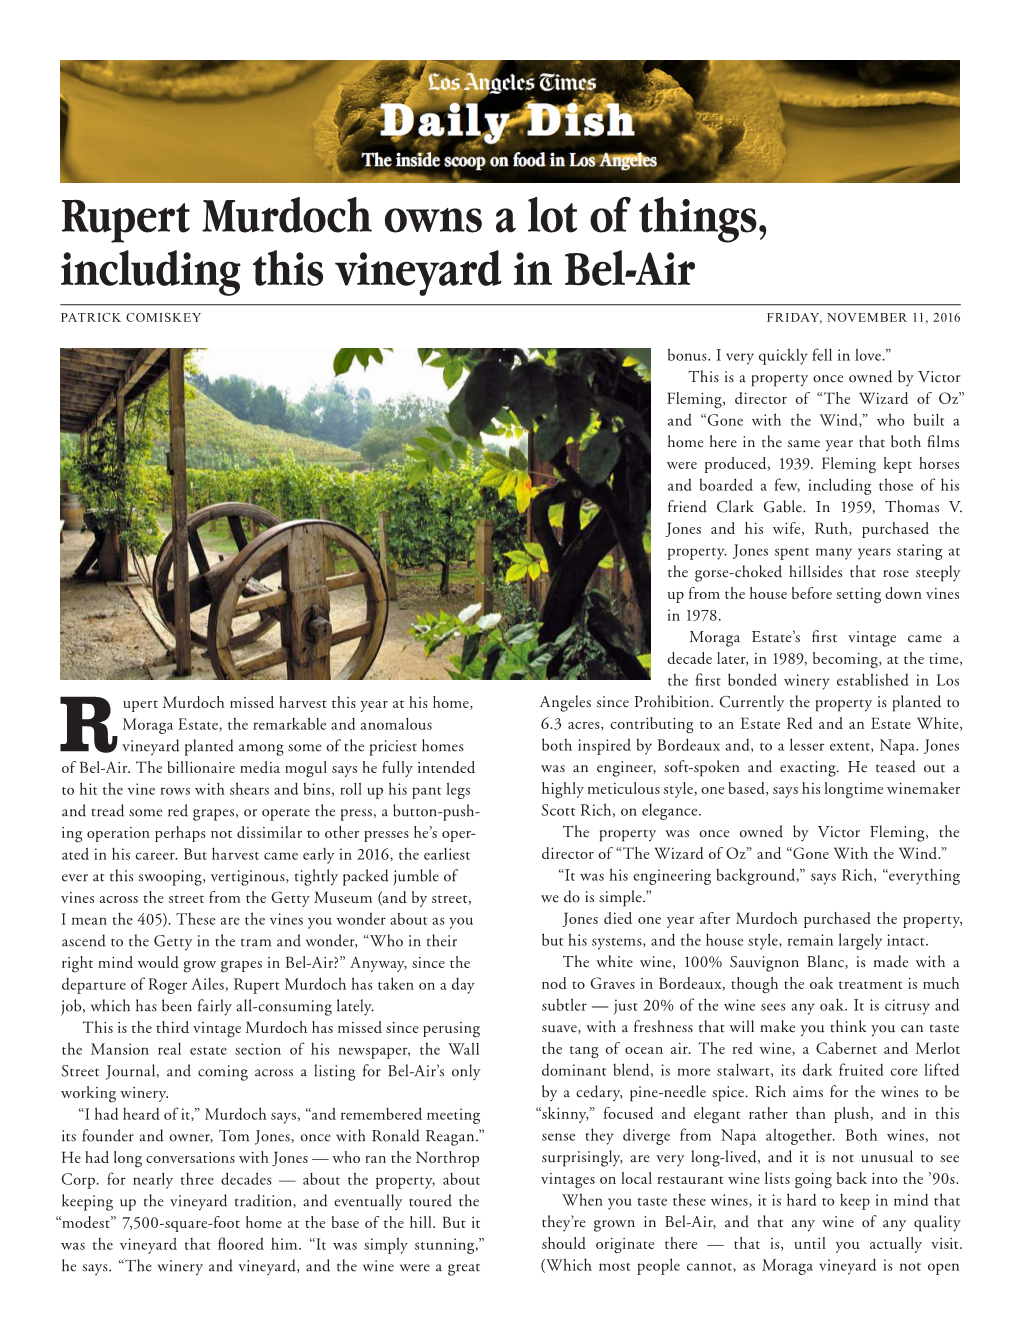 Rupert Murdoch Owns a Lot of Things, Including This Vineyard in Bel-Air